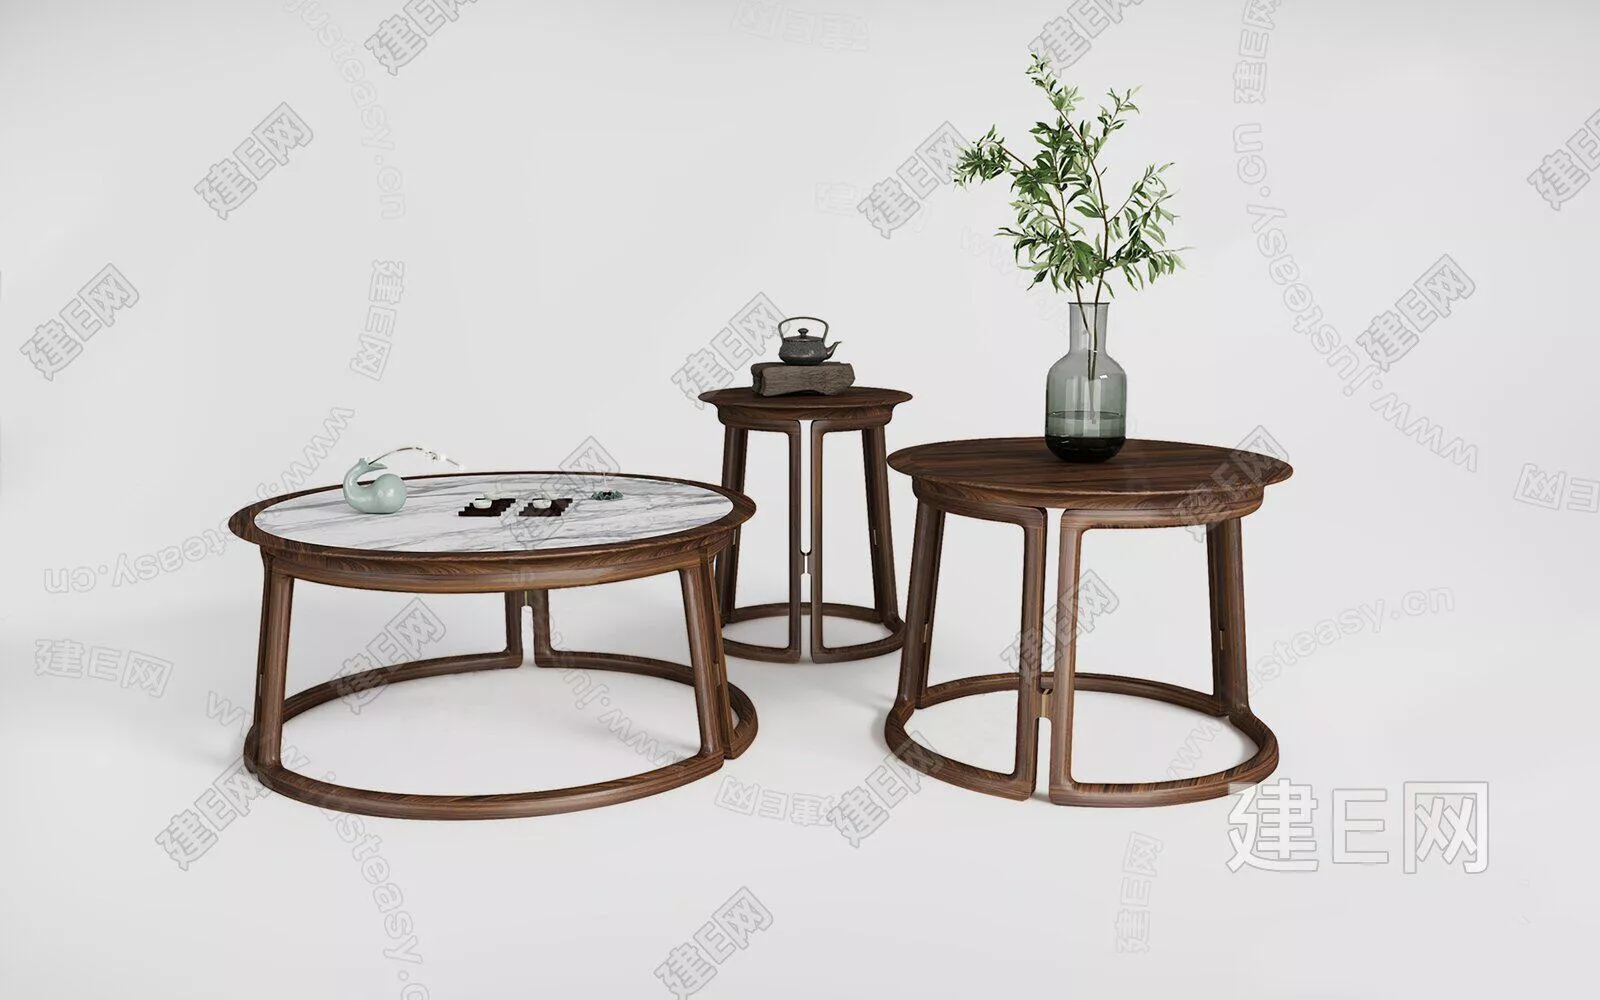 CHINESE COFFEE TABLE - SKETCHUP 3D MODEL - VRAY - 110904595